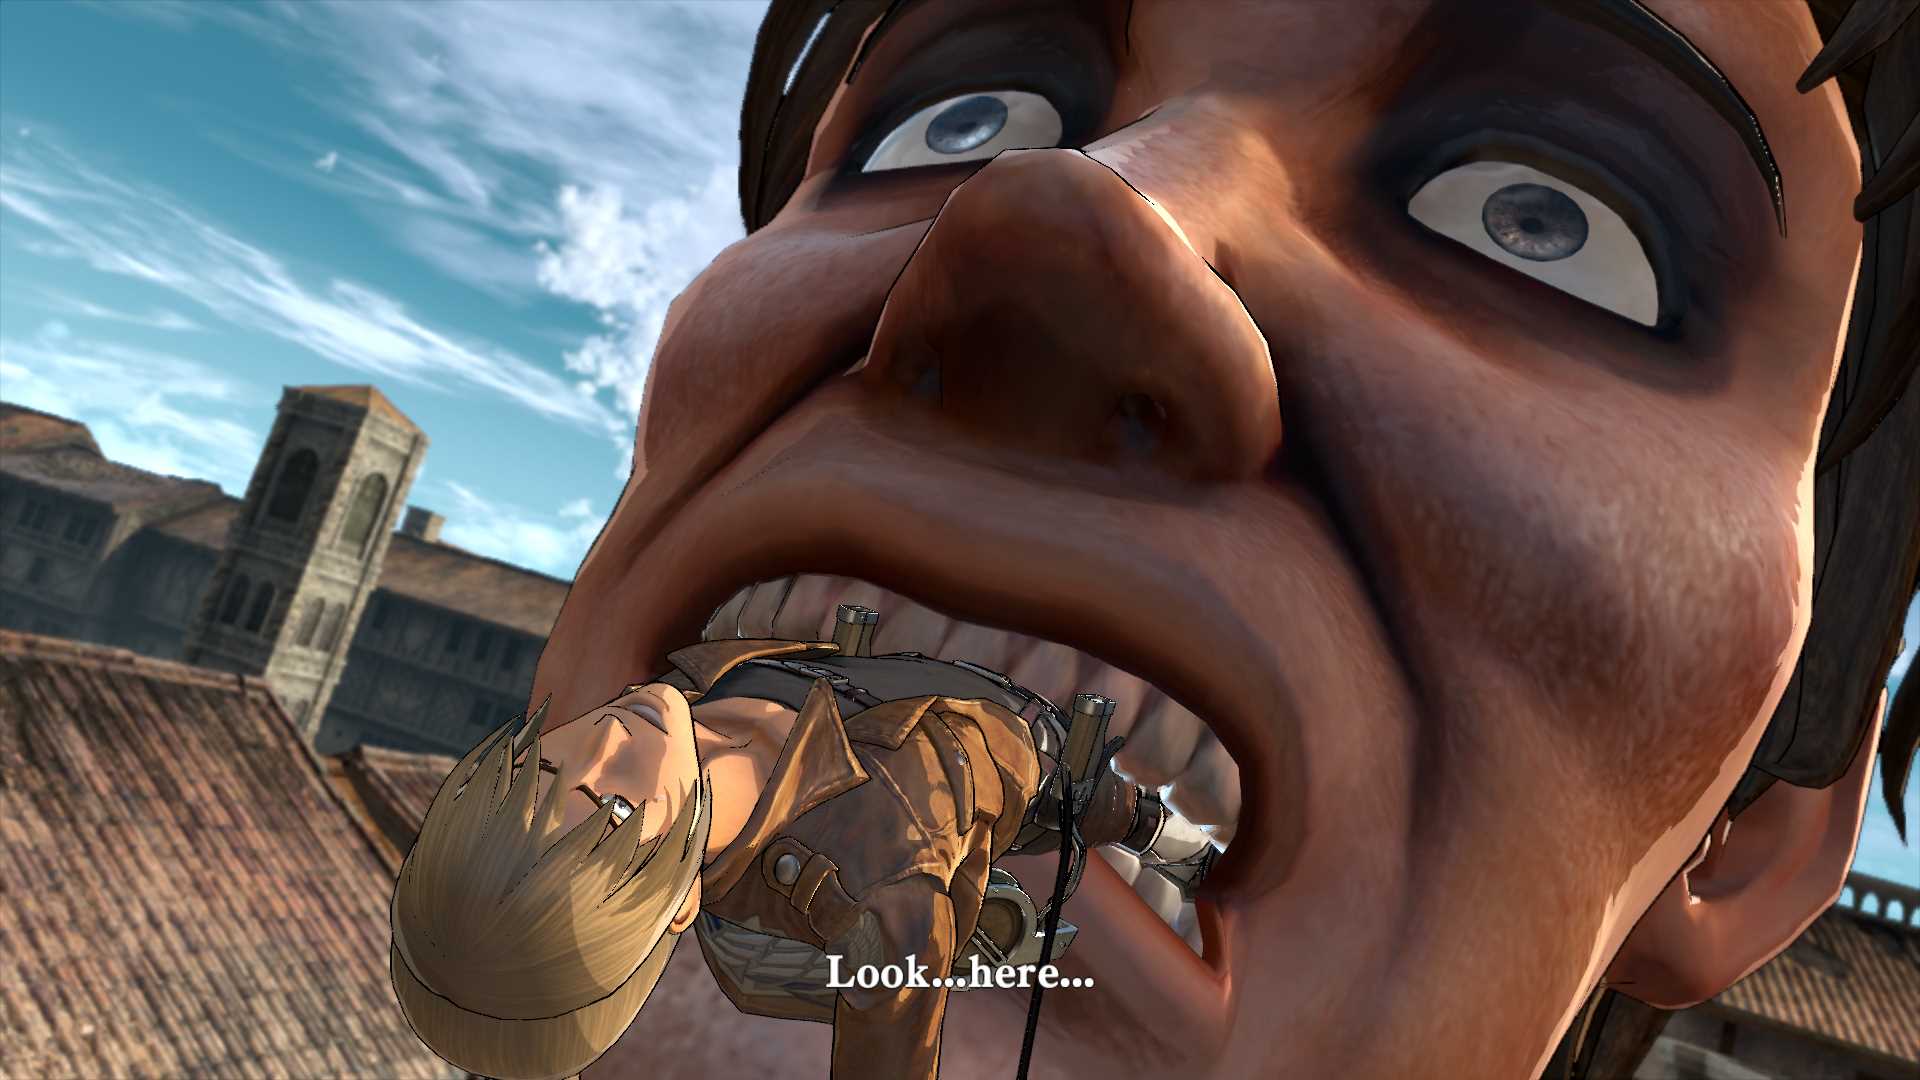 attack on titan wings of freedom switch